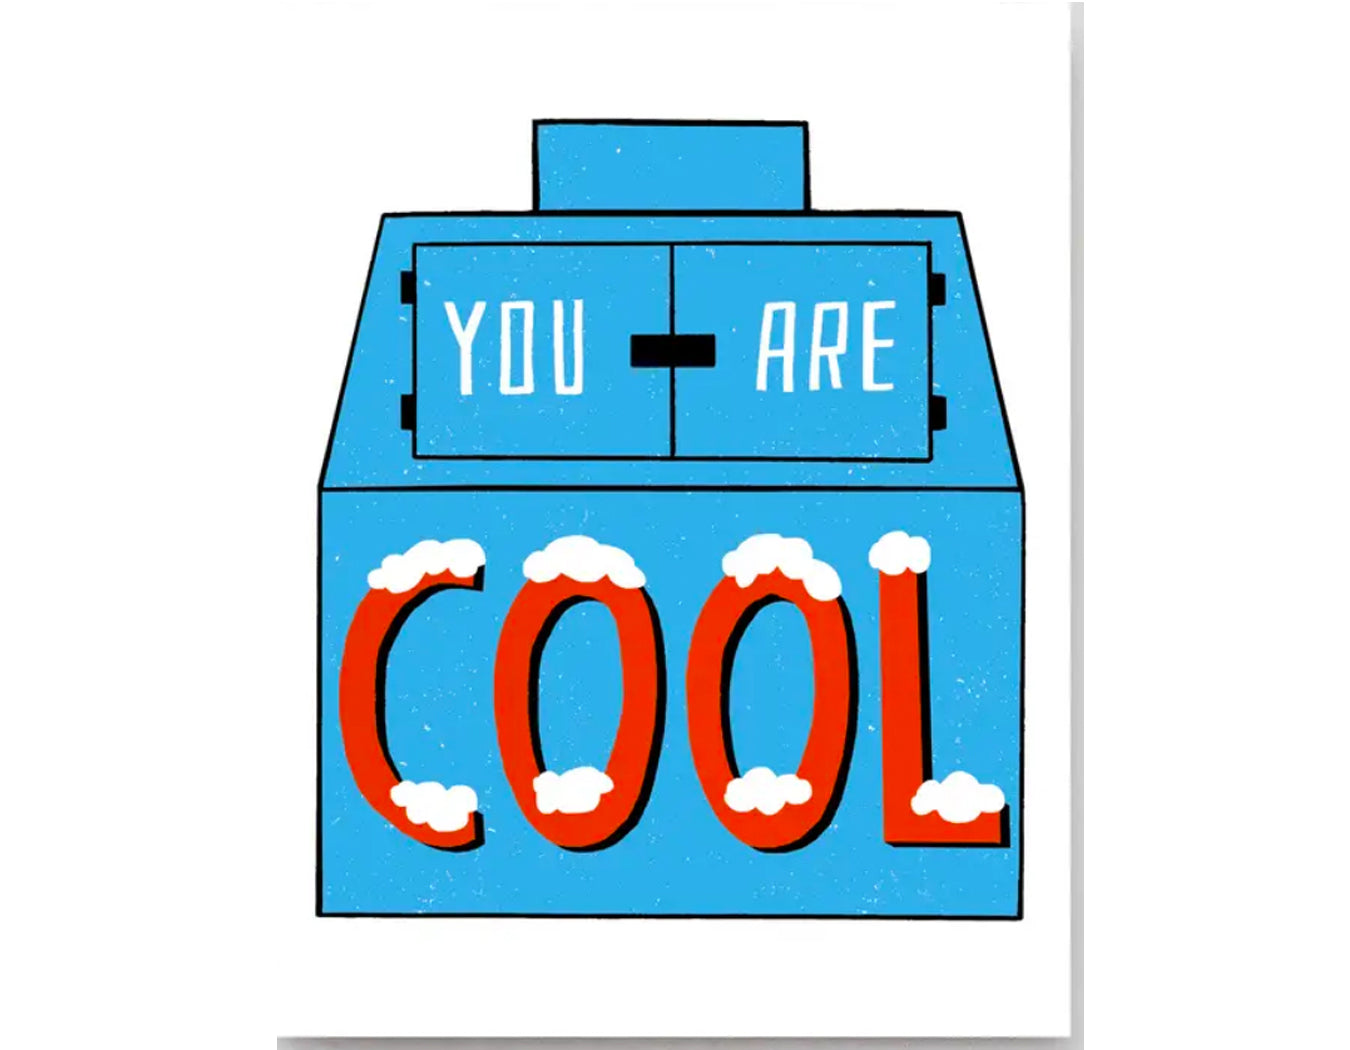 blue vintage ice cooler with text you are cool across it. cool is red foil.